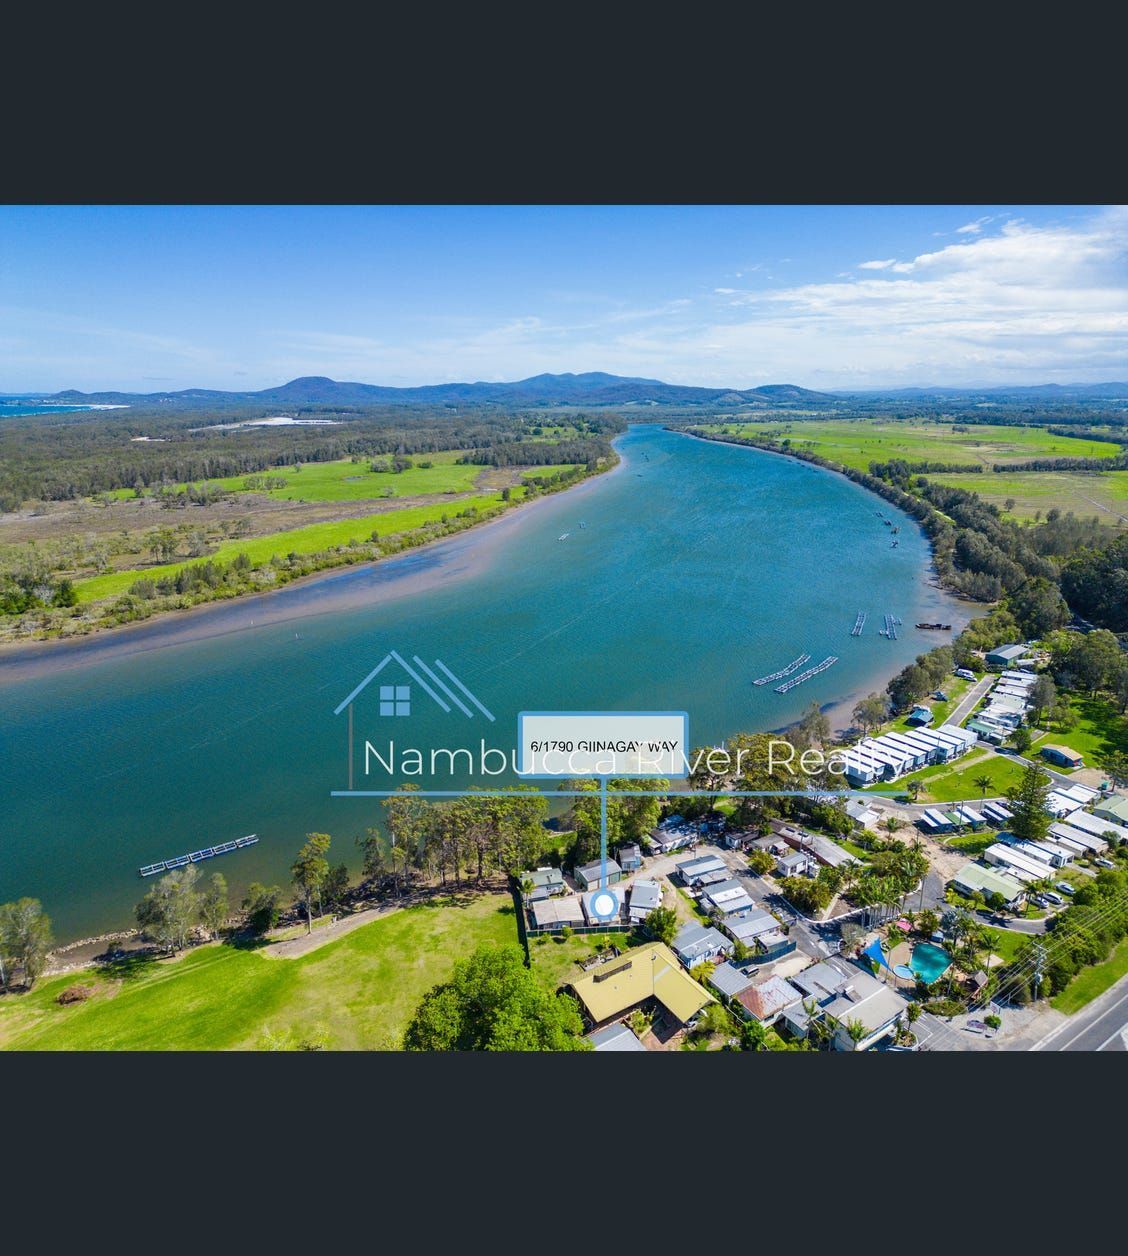 House for sale - 6/1790 Giinagay Way, Nambucca Heads, NSW 2448
 by Nambucca River Realty